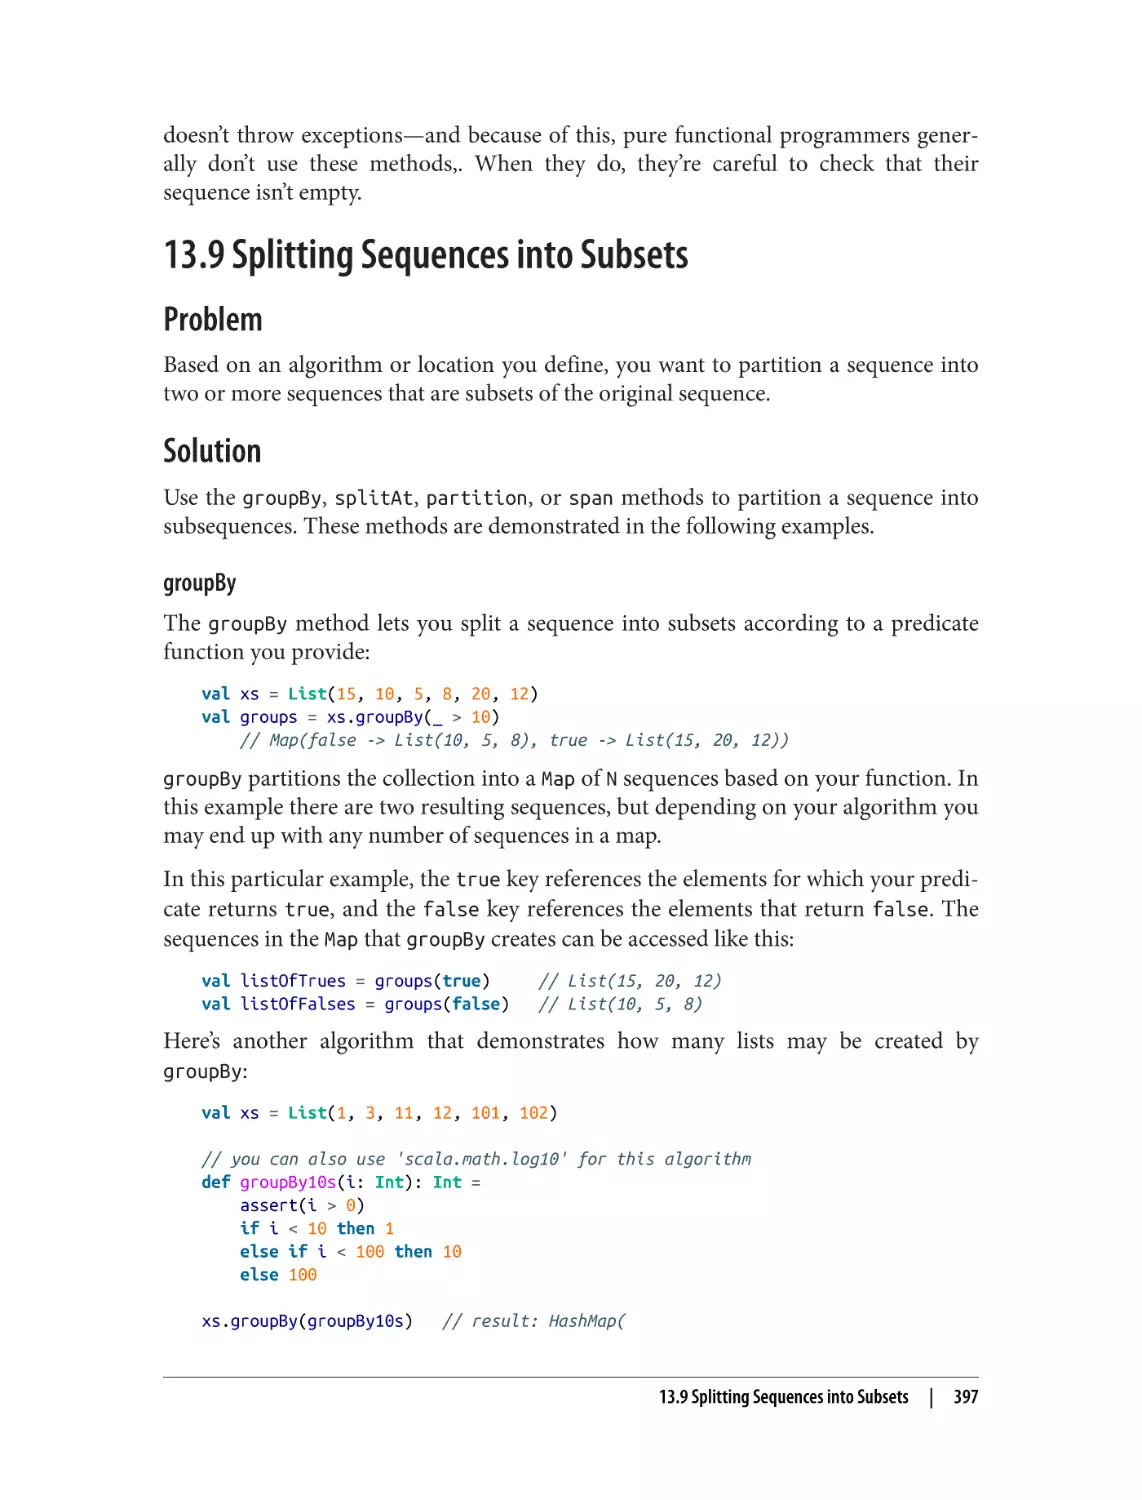 13.9 Splitting Sequences into Subsets
Problem
Solution